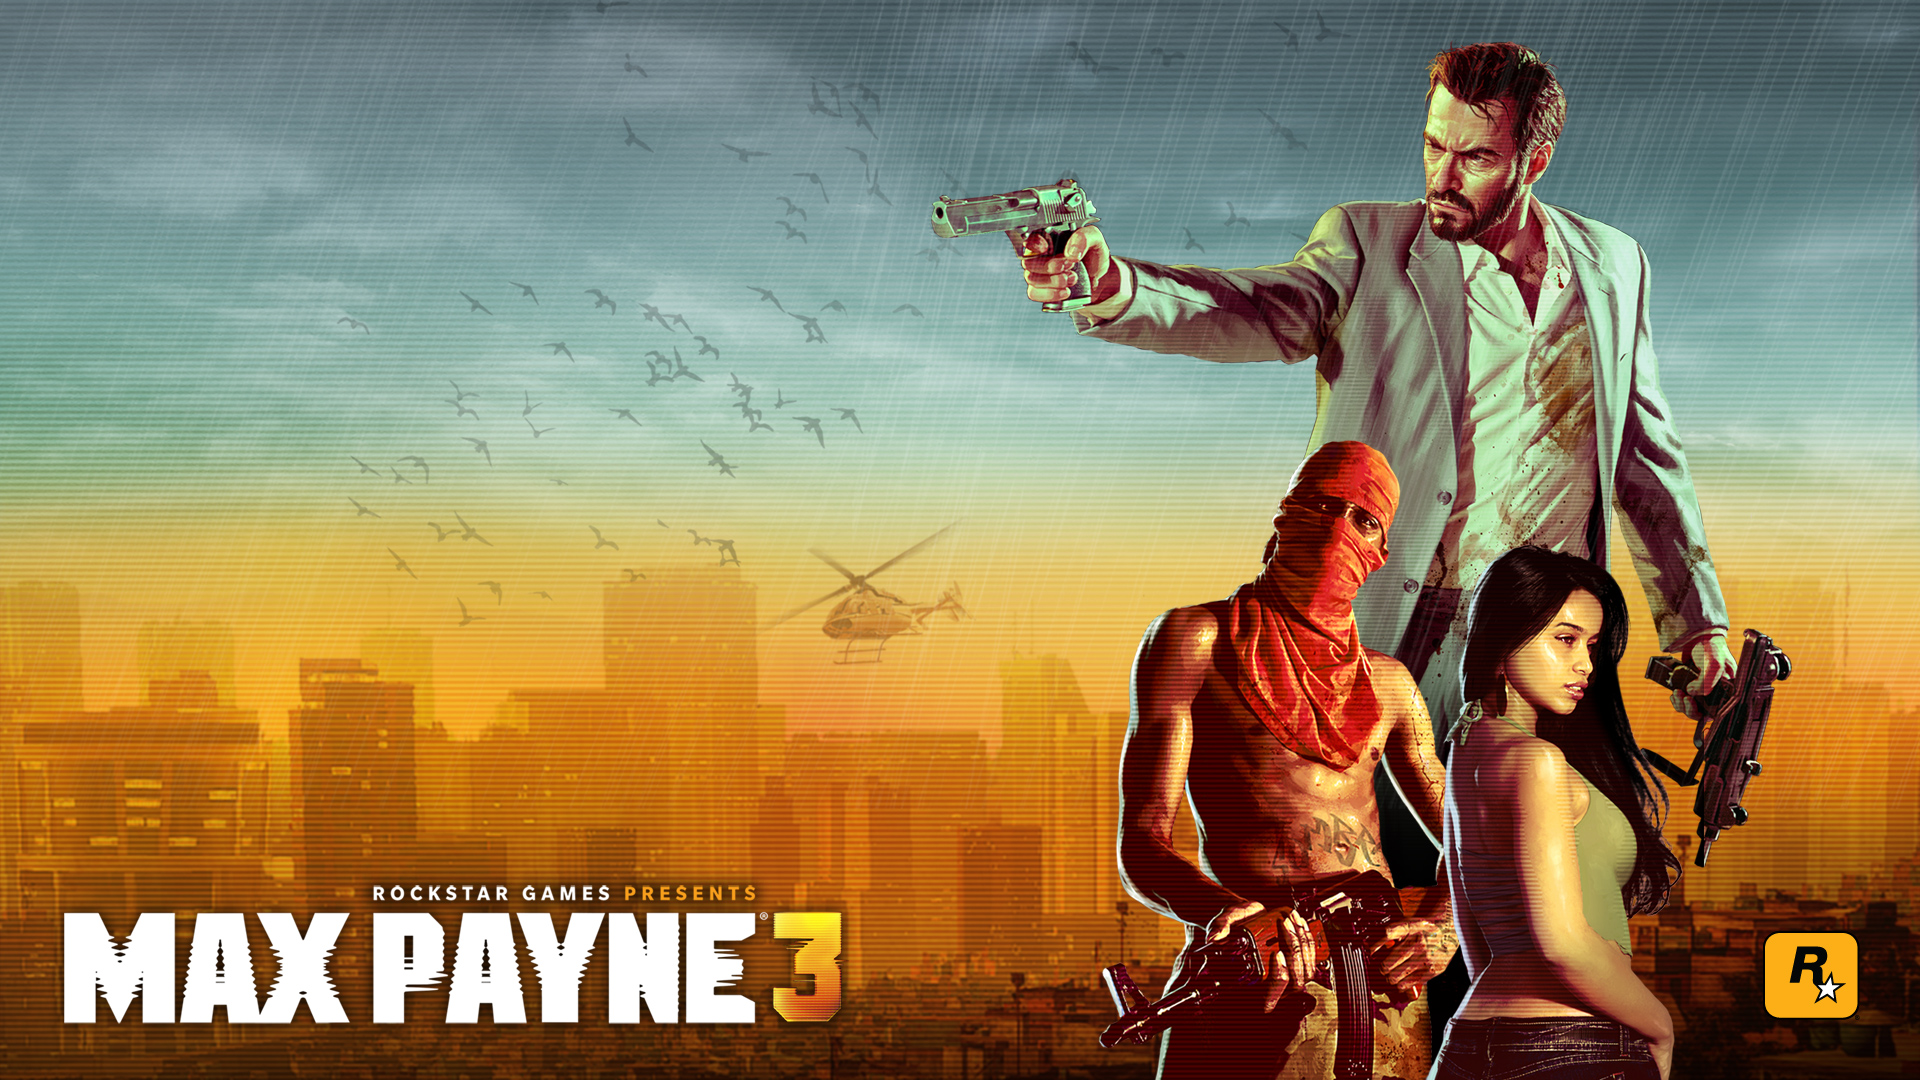 Max Payne 3 Wallpapers NetworkNews